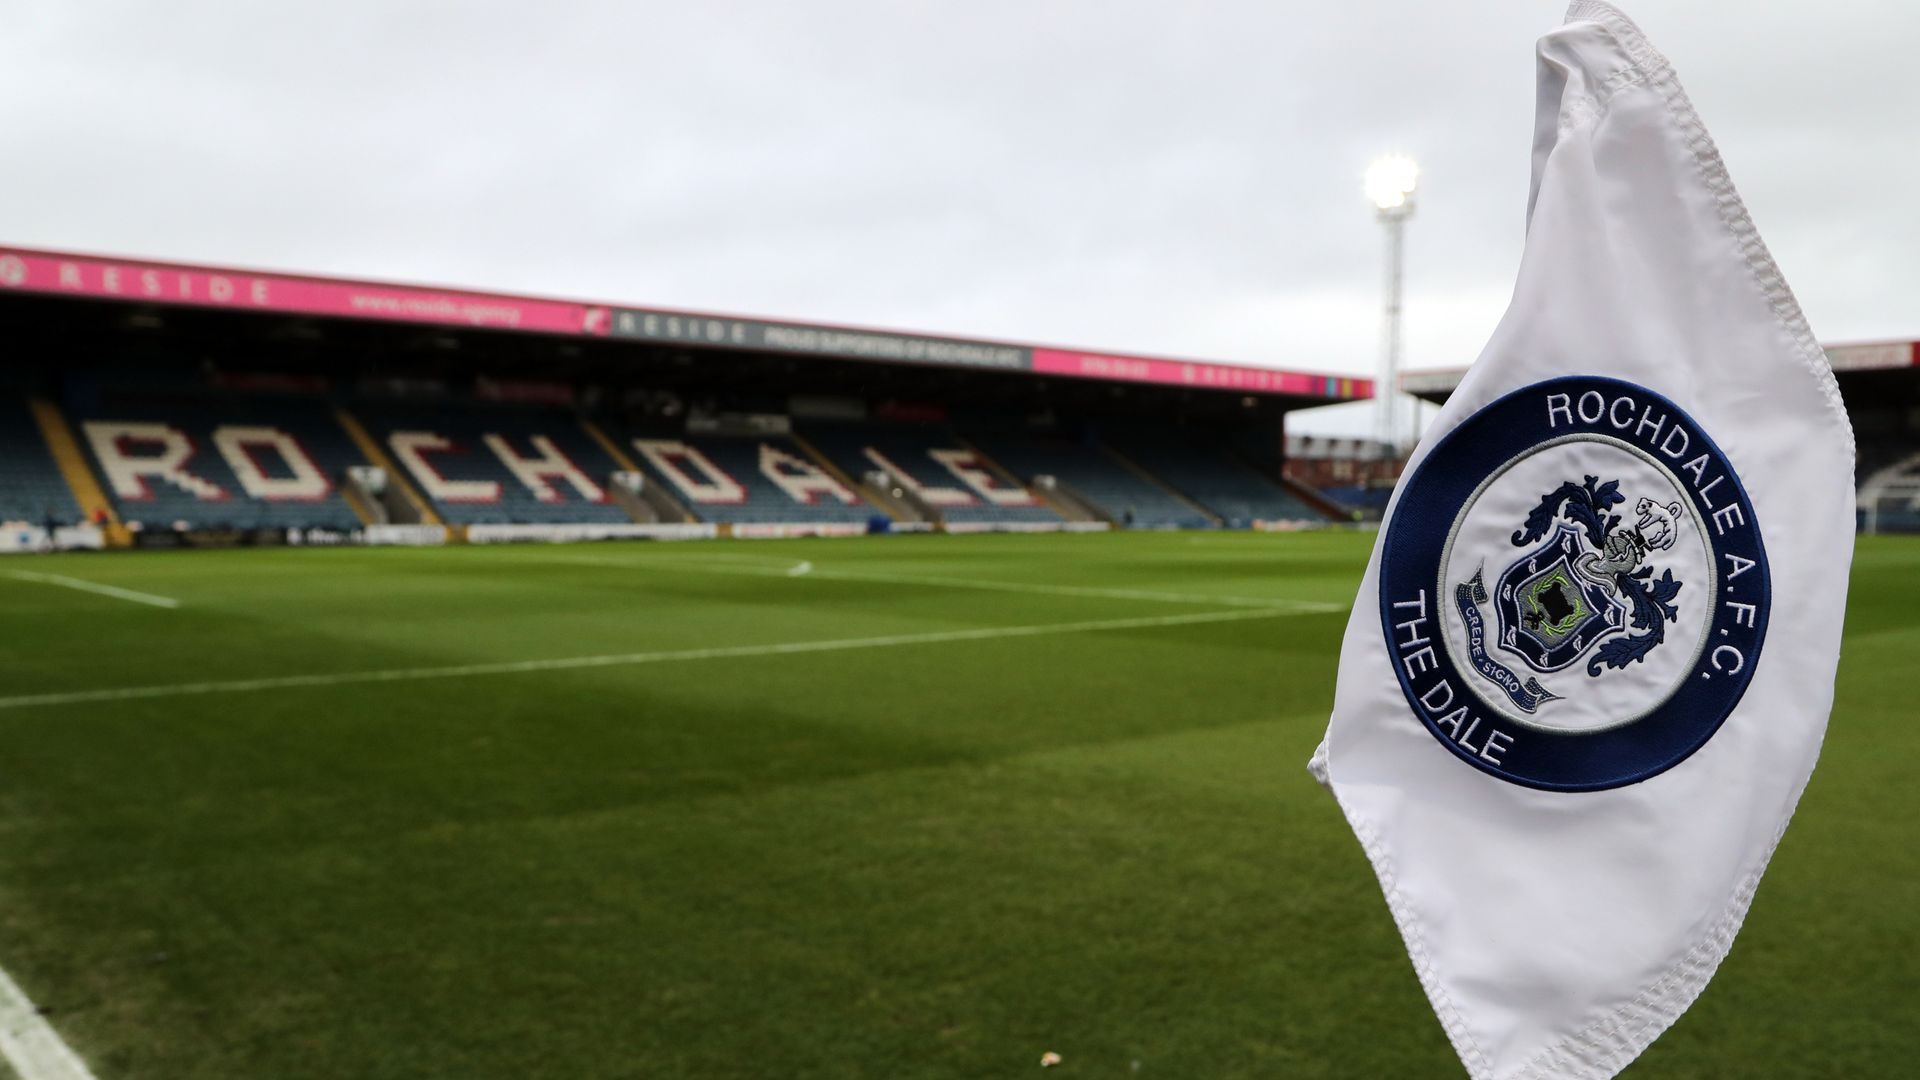 Rochdale's groundsman suspended for racial abuse towards broadcaster